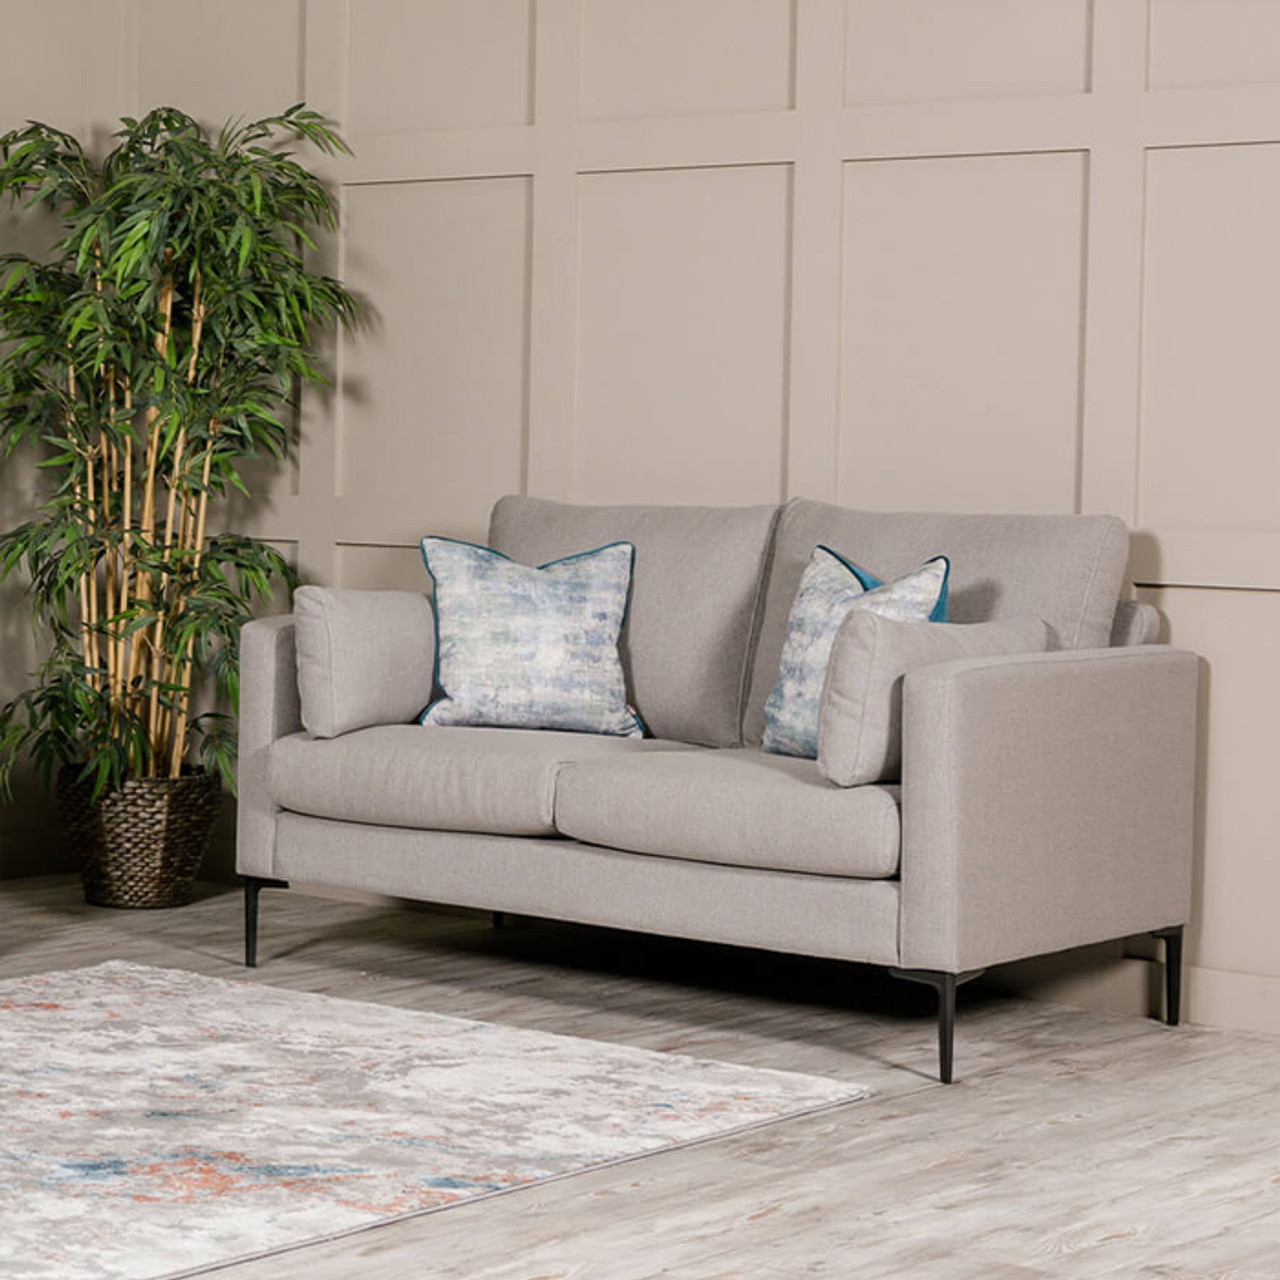 Cobh 2 Seater Sofa *Pre-Order - End July Delivery